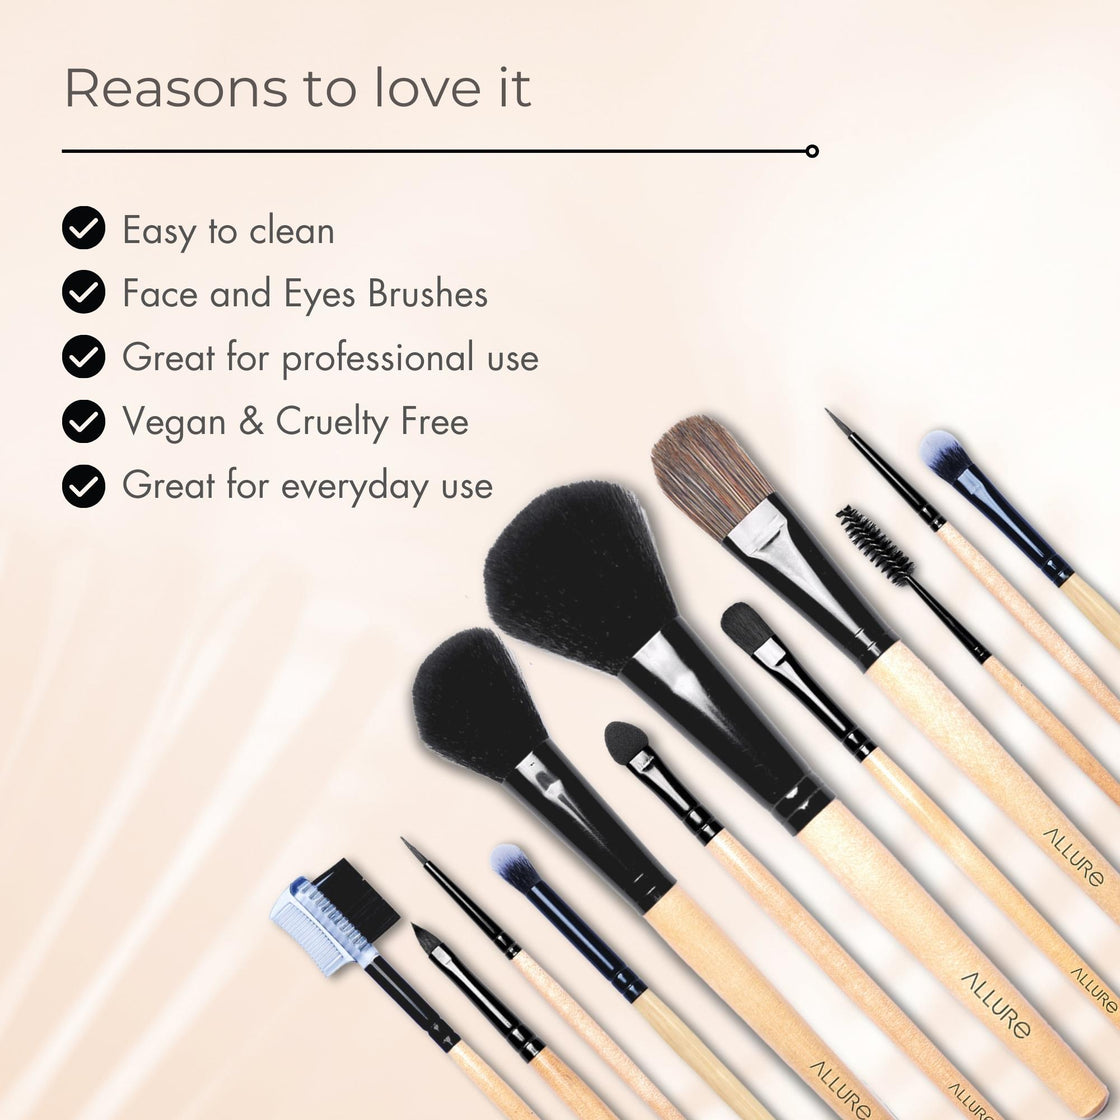 Allure Classic ACK-12 Pack Of 12 Makeup Brush Set With Travel Pouch